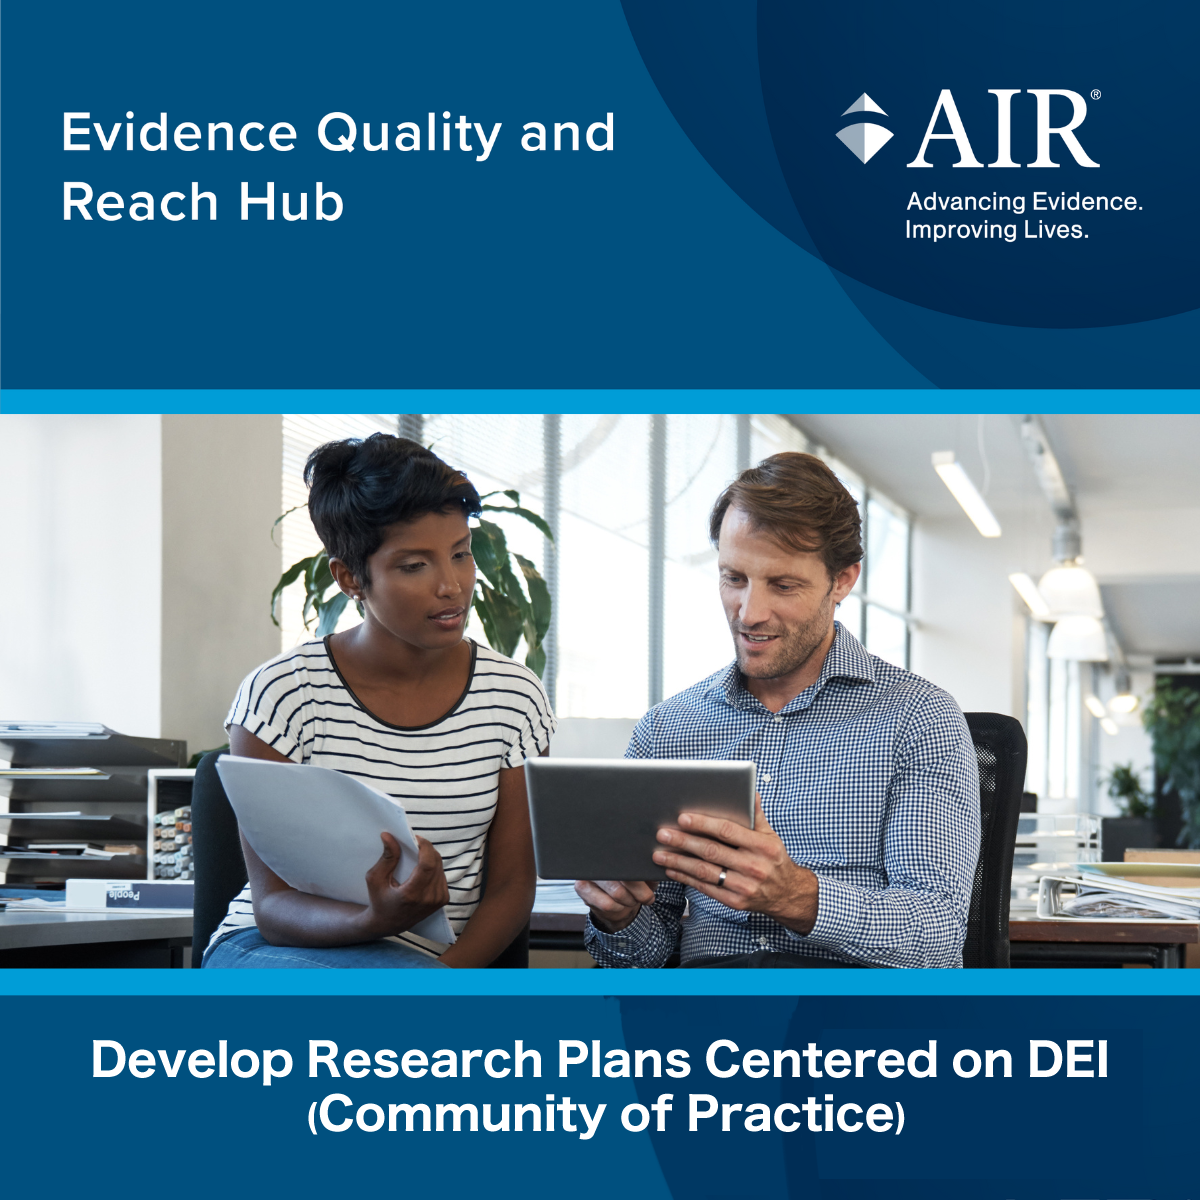 Evidence Quality and Reach Hub flyer for community of practice